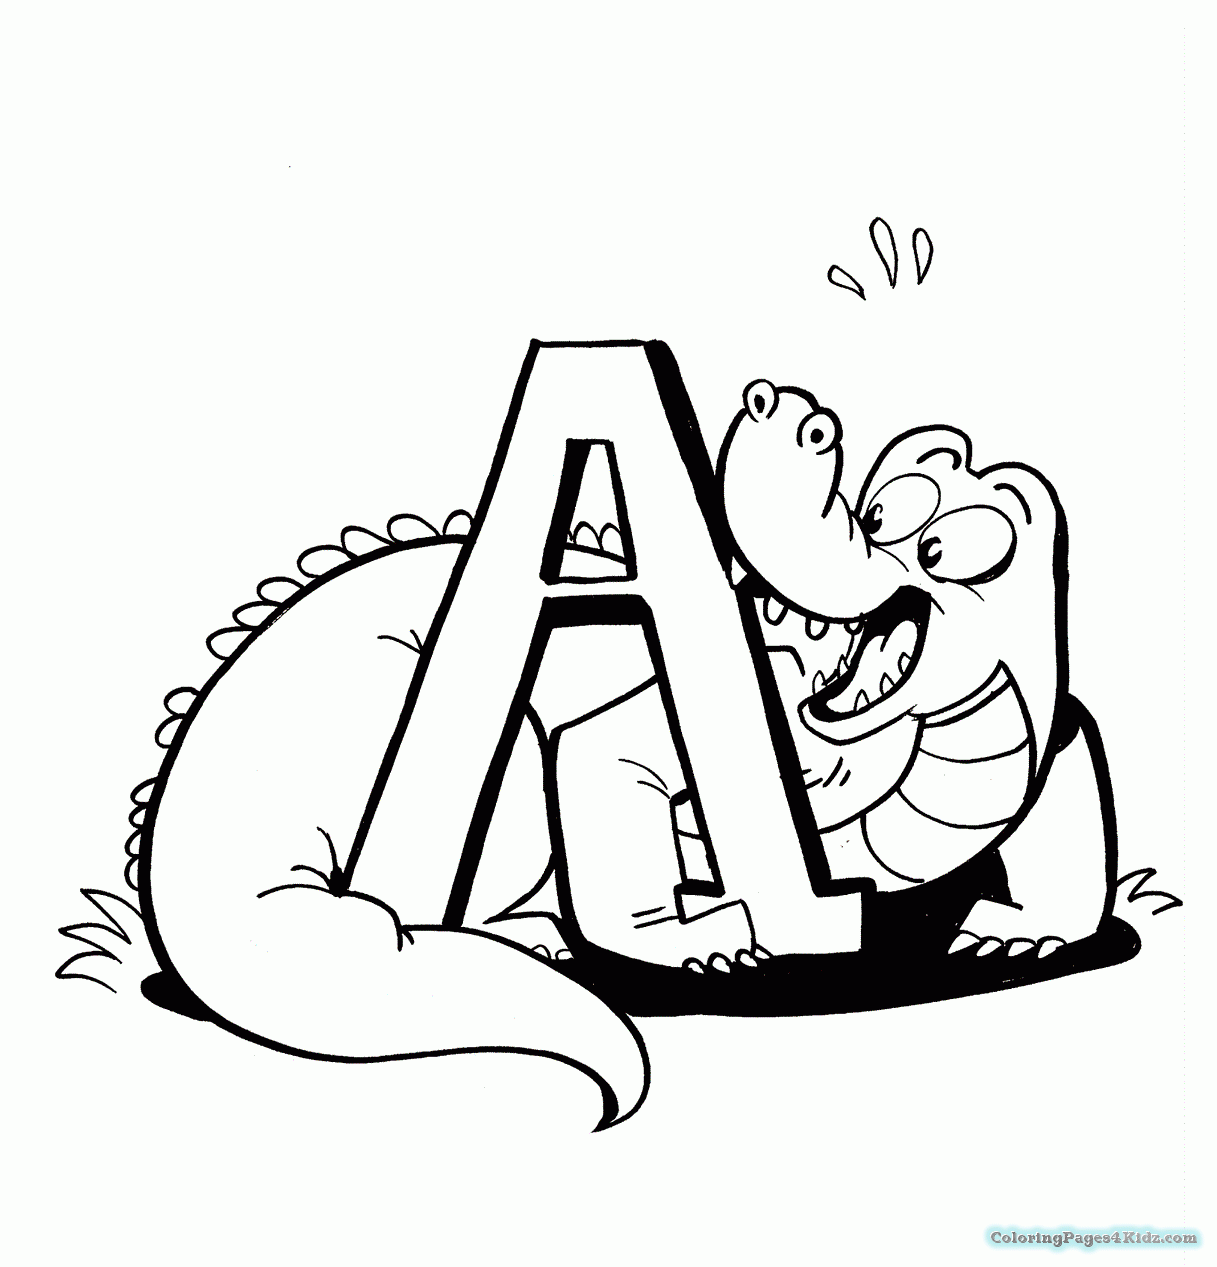 Alligator Coloring Pages For Kids | Free Printable Coloring Pages